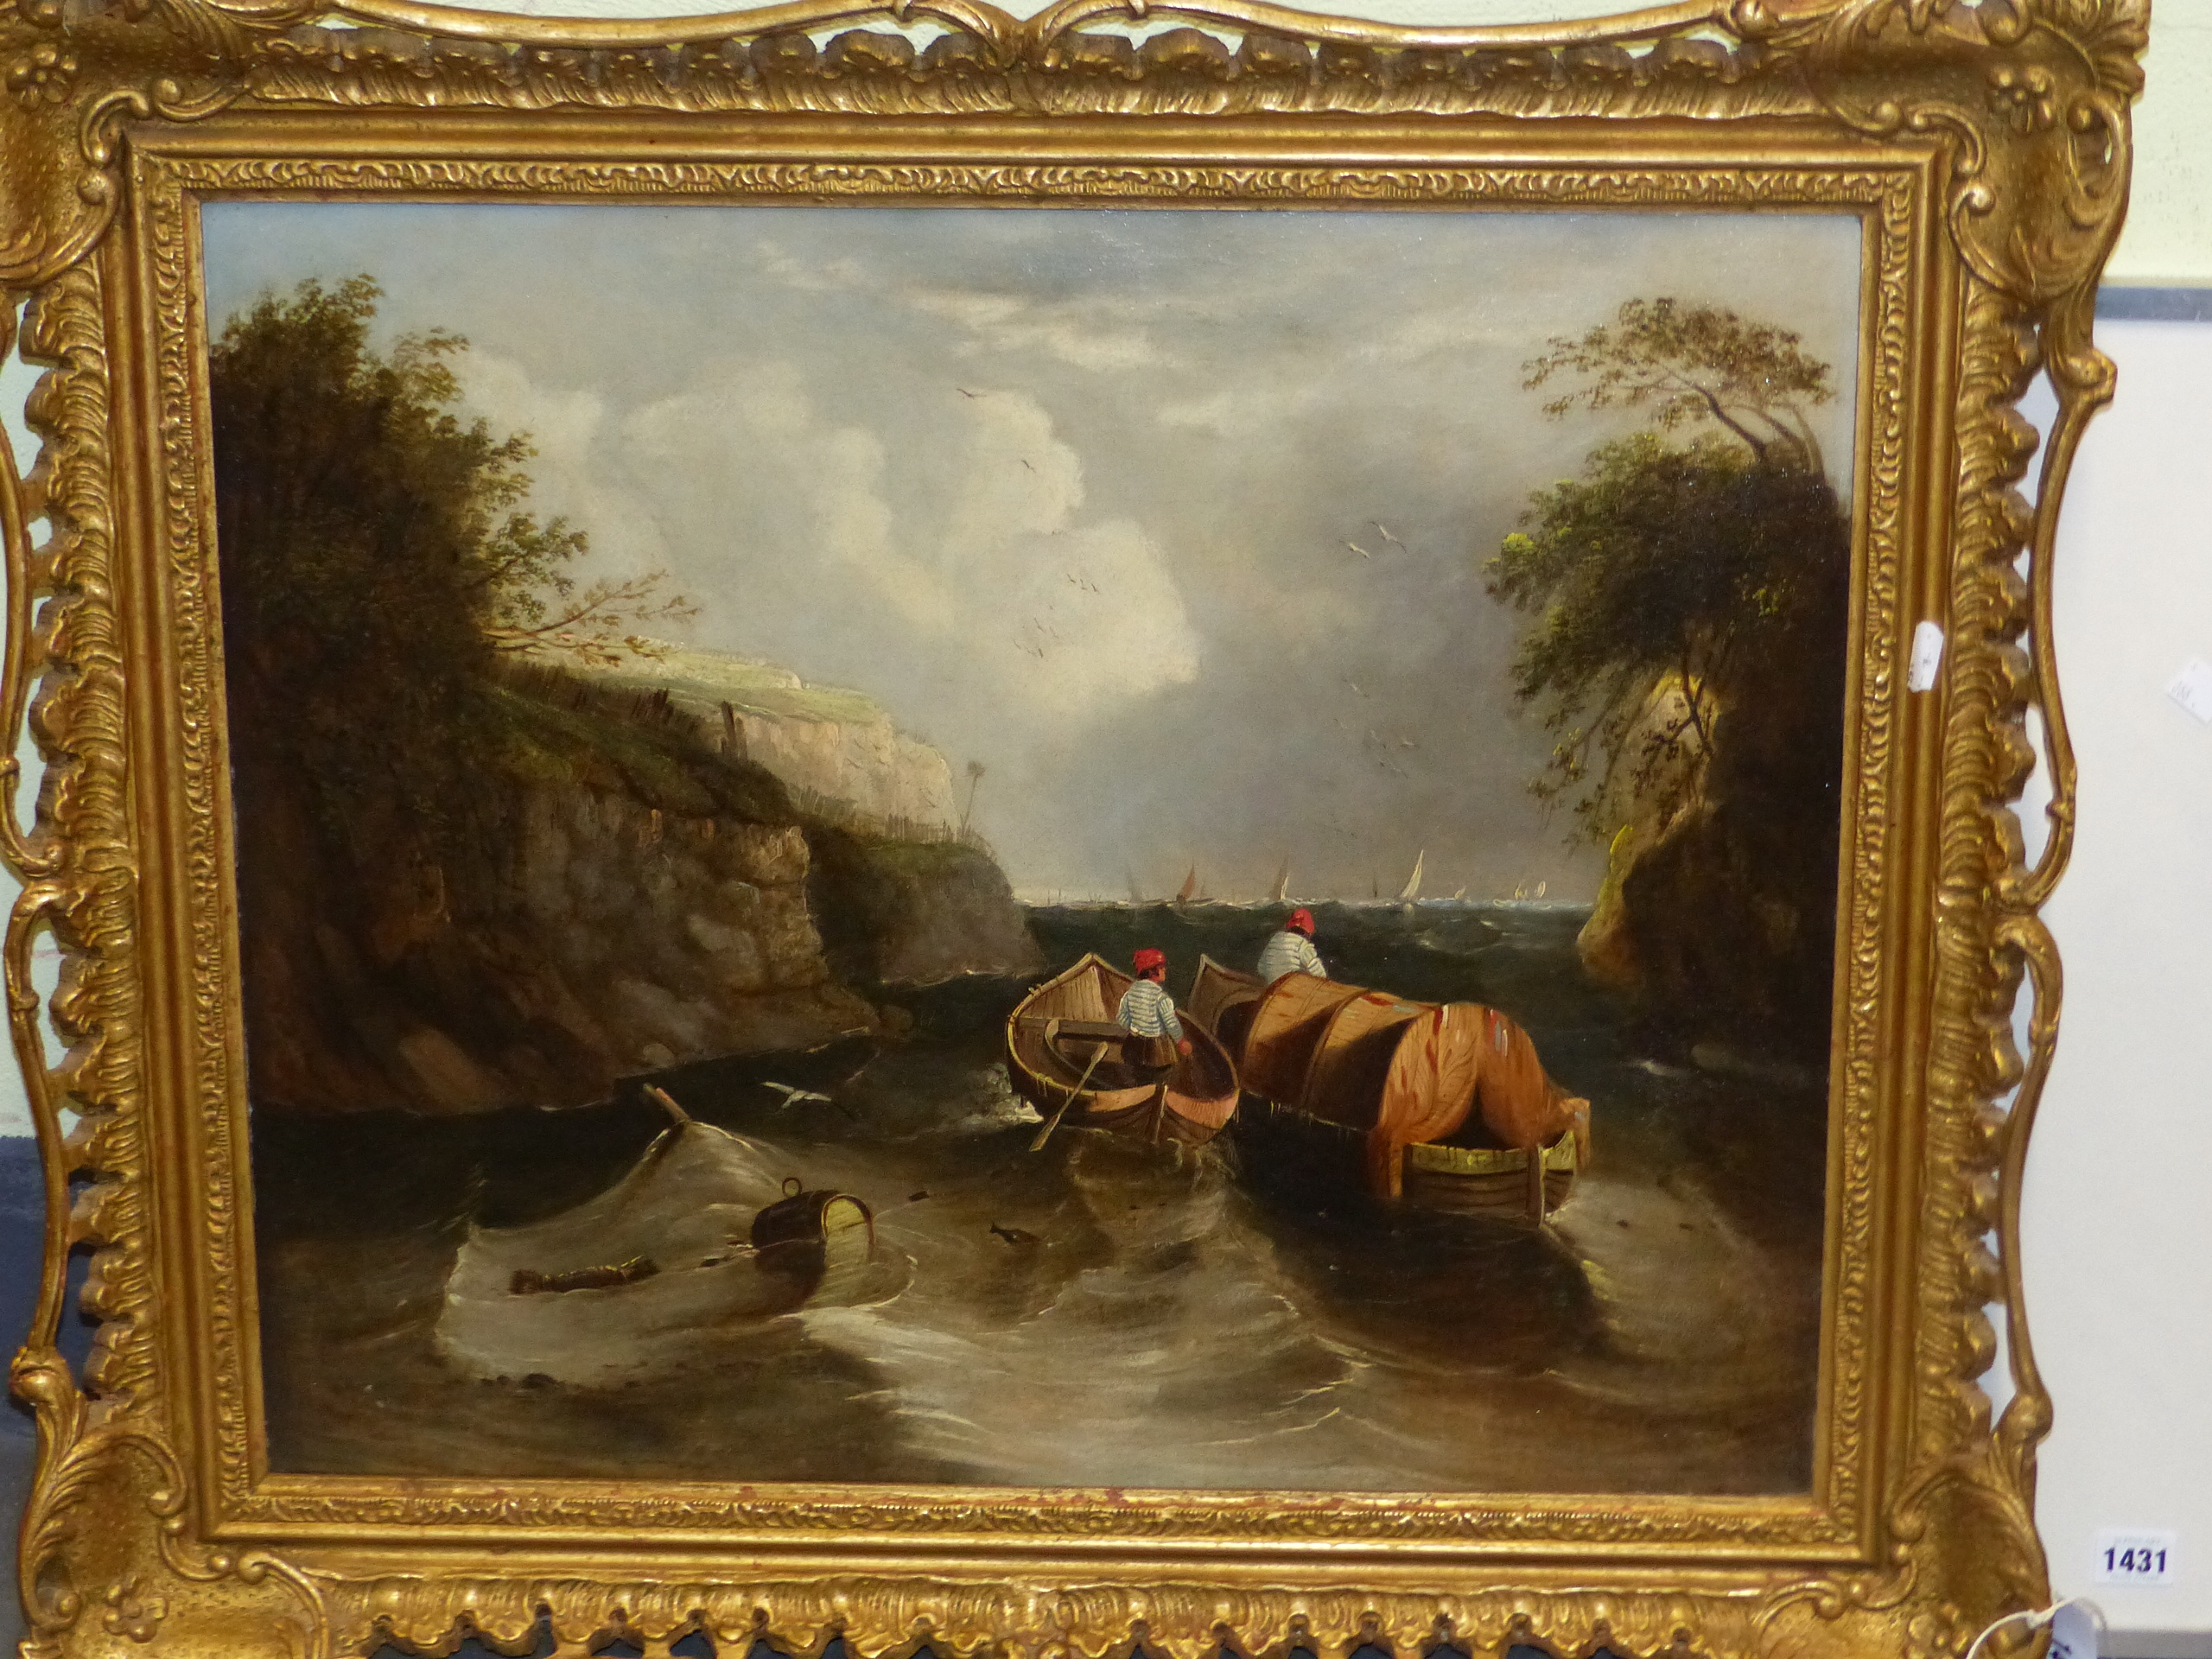 CLARKSON STANFIELD (1793 - 1867). SHELTERING FROM THE ONCOMING STORM, SIGNED OIL ON CANVAS. 52 x - Image 8 of 11